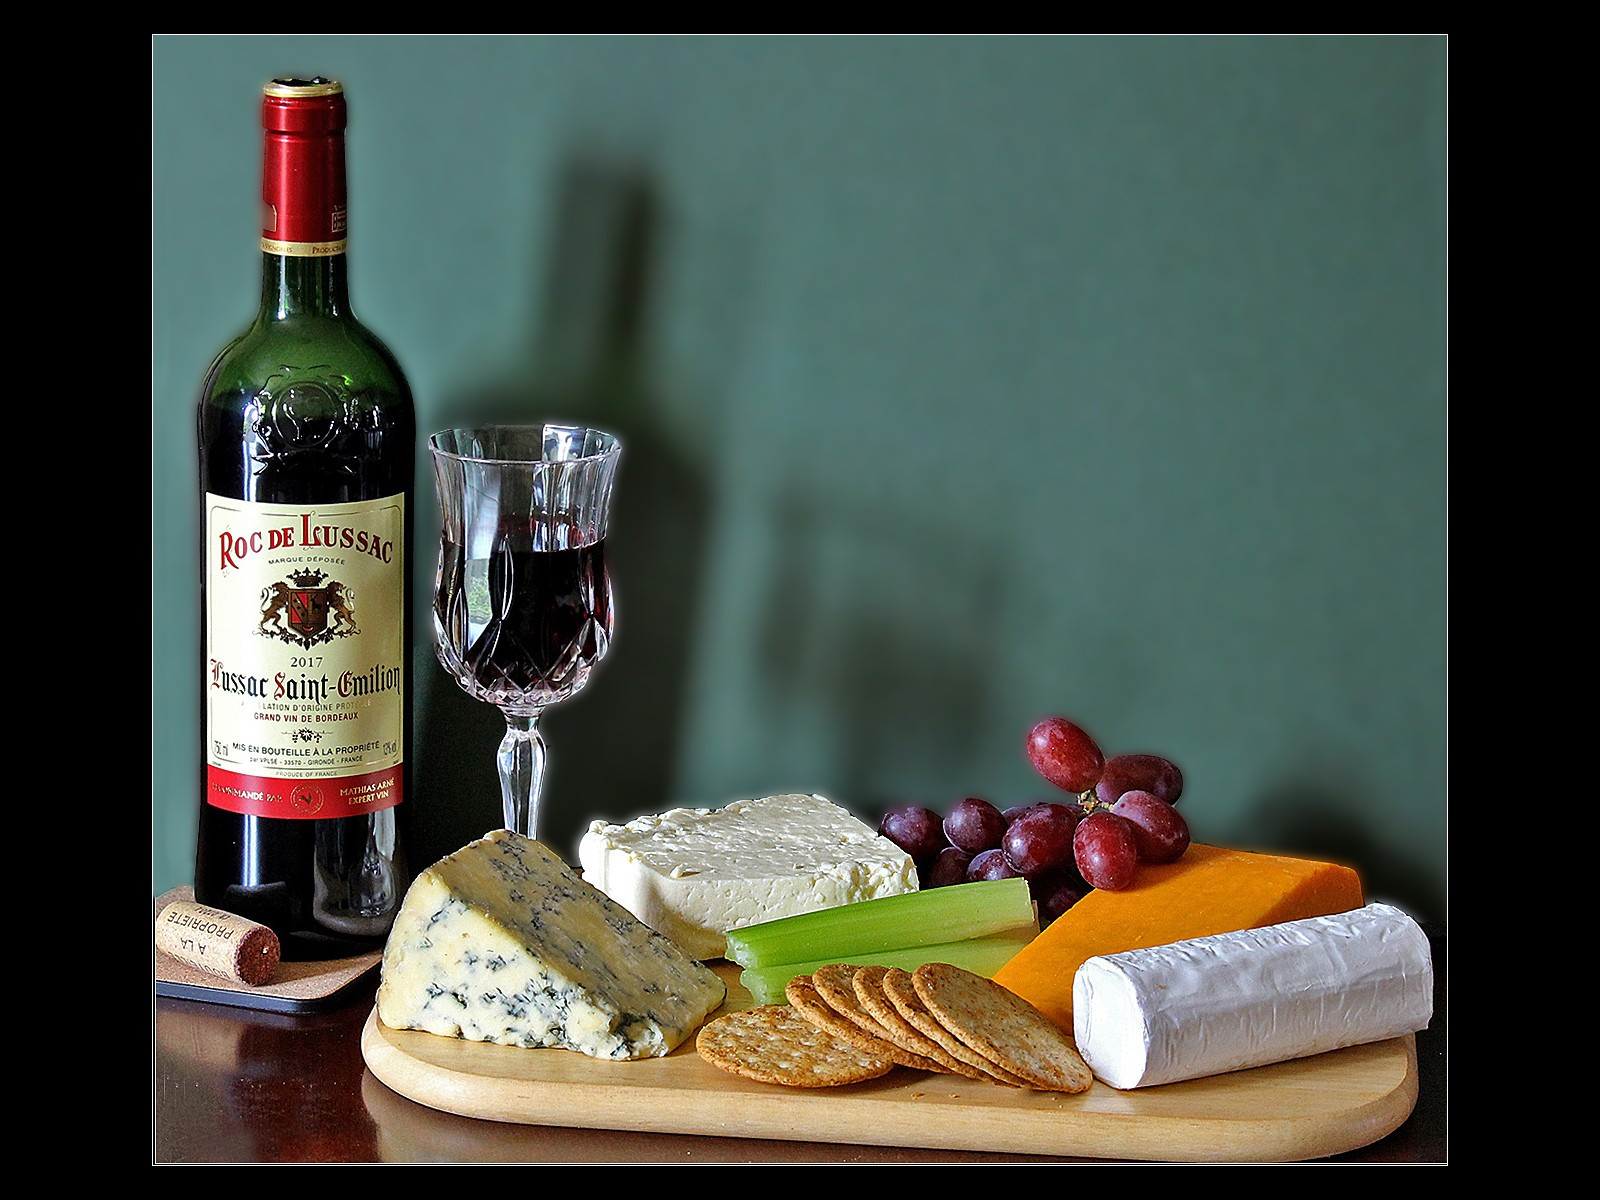 9.Cheese and Wine